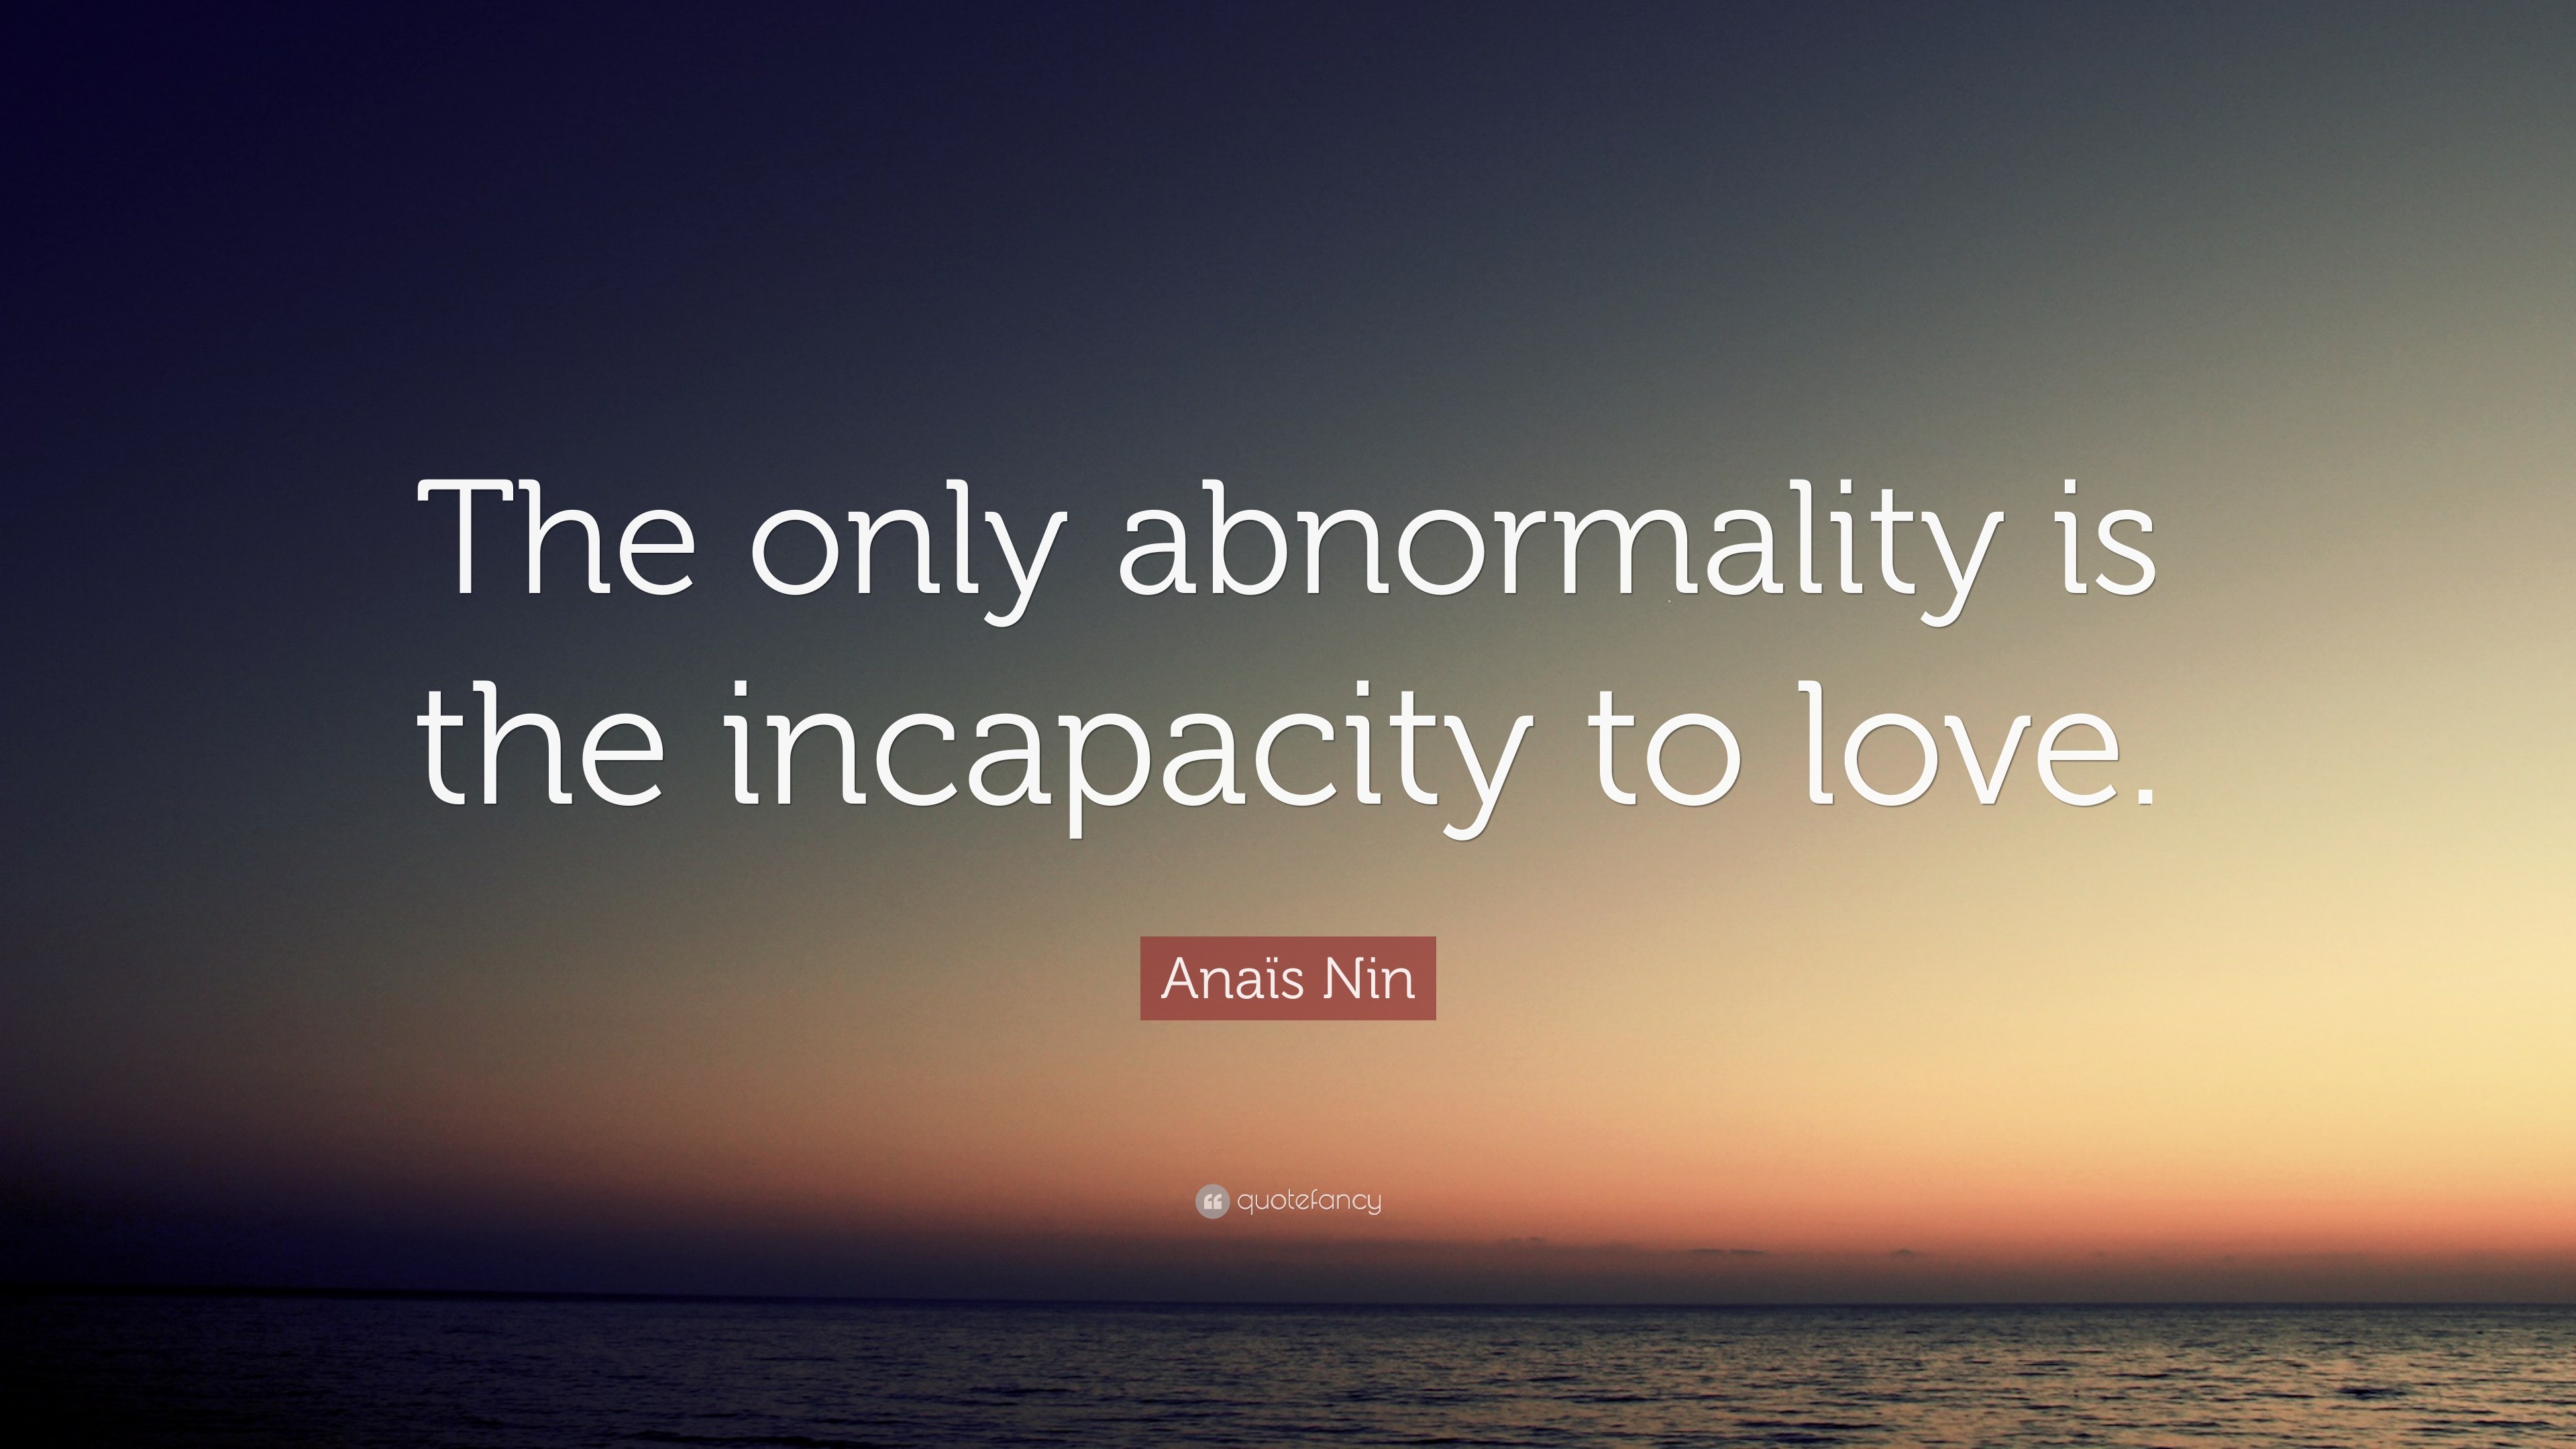 3840x2160 AnaÃ¯s Nin Quote: “The only abnormality is the incapacity to love.”